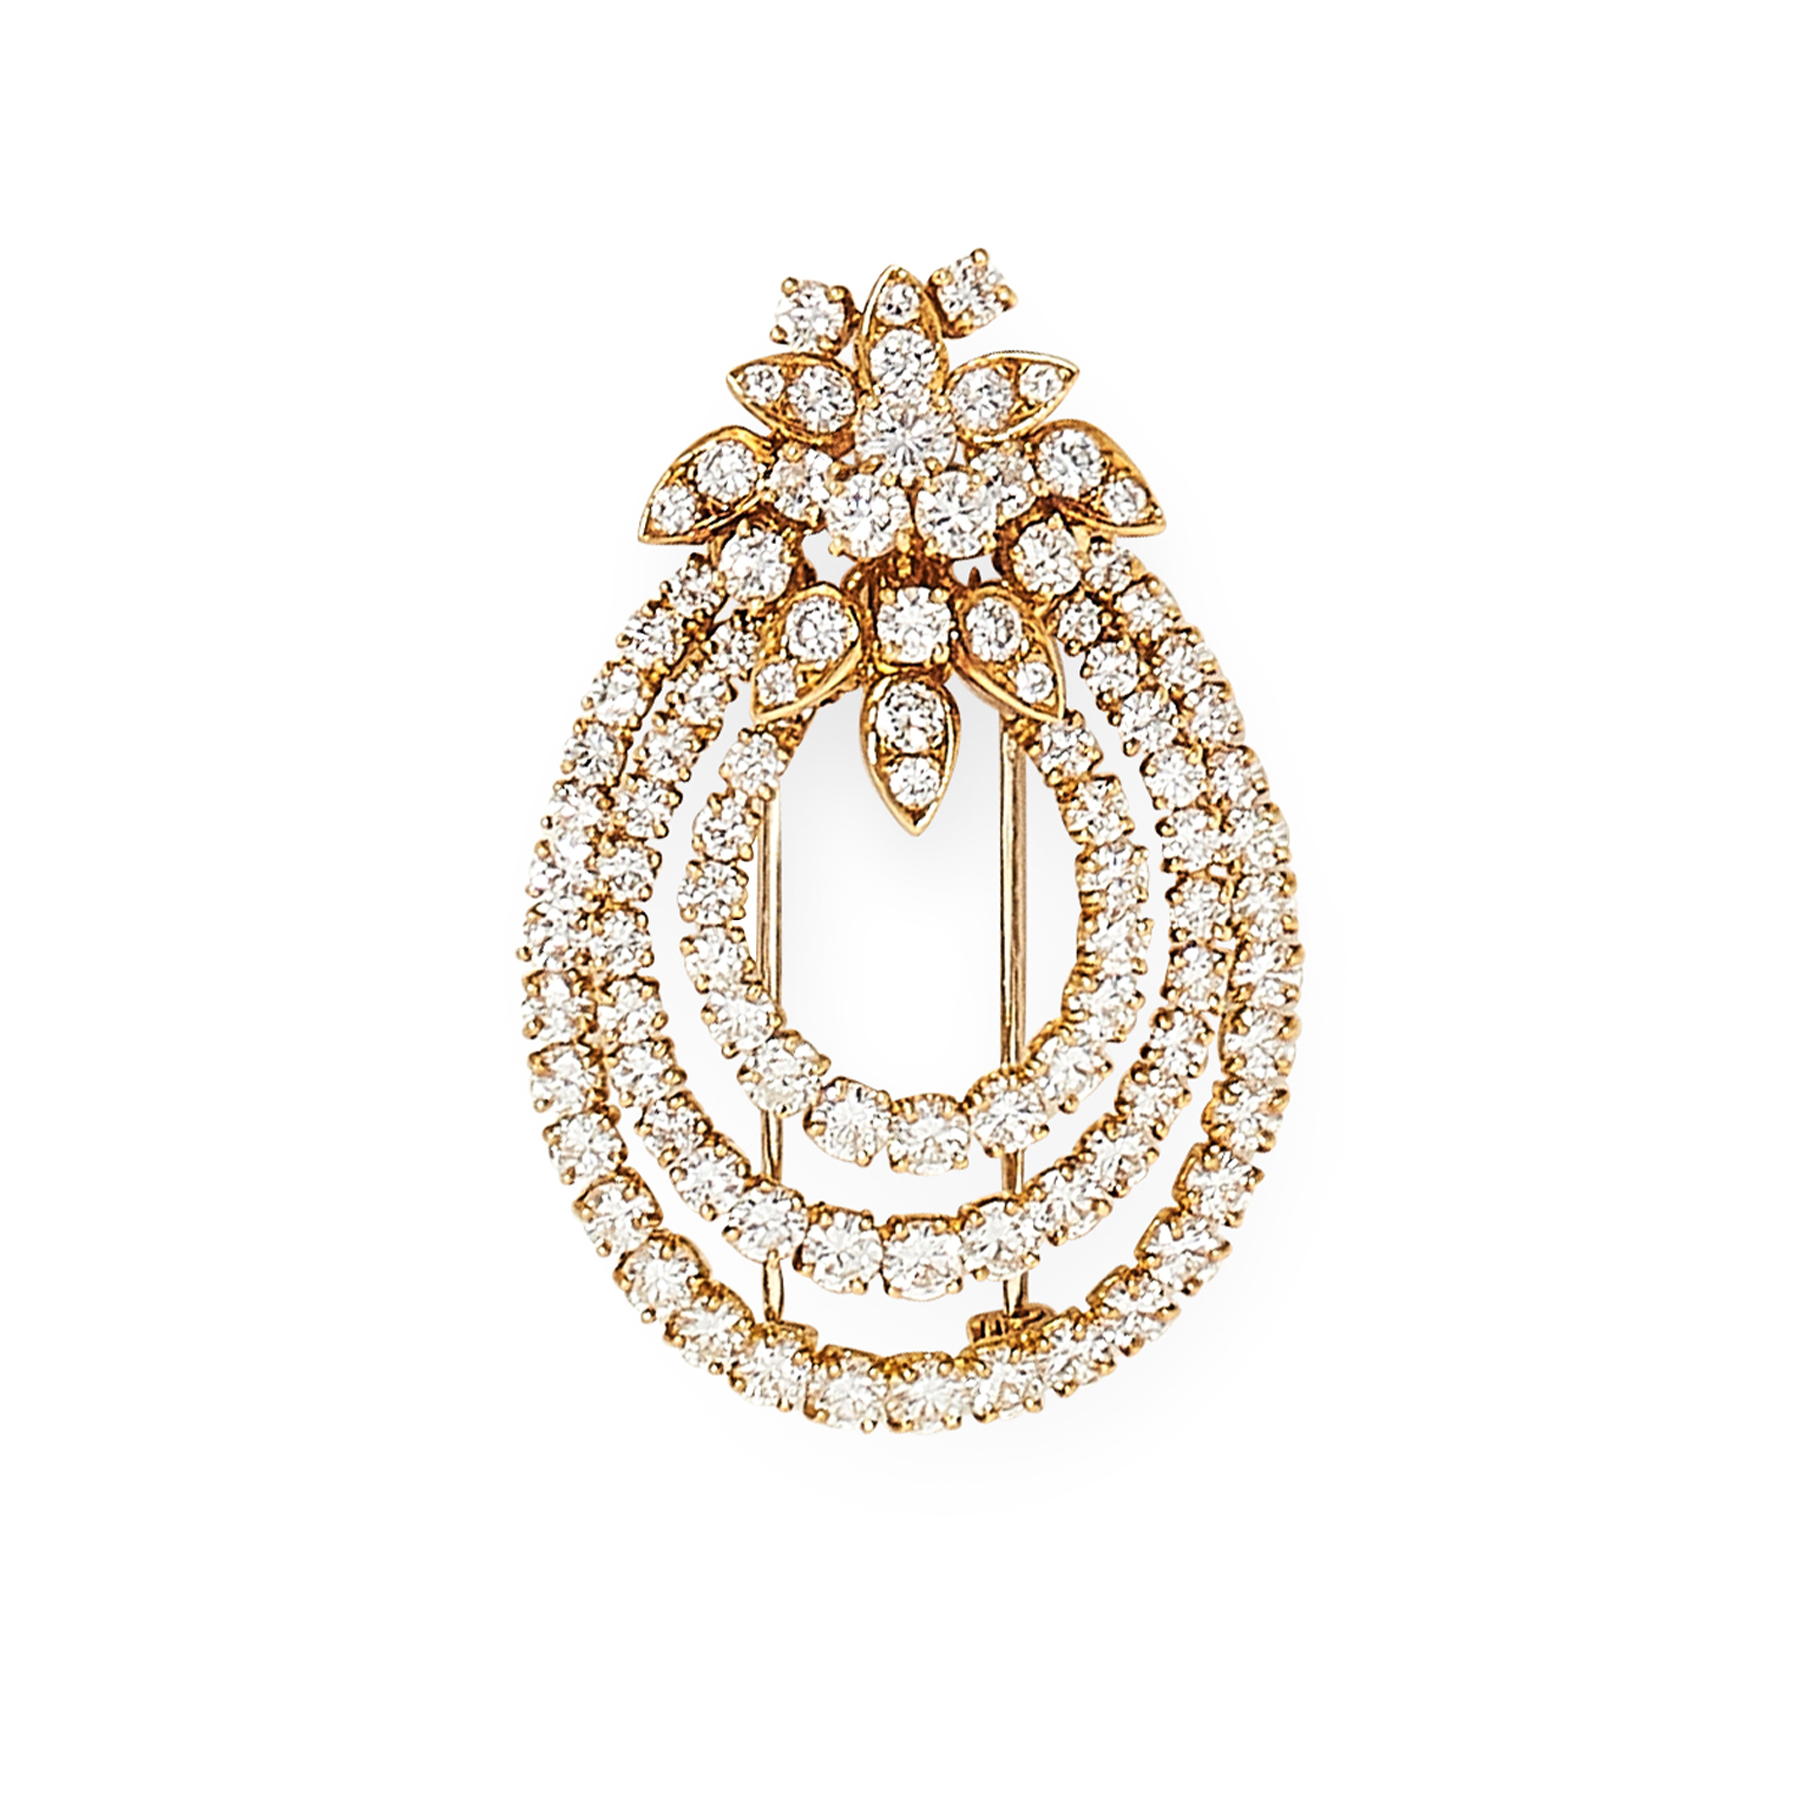 AN IMPORTANT DIAMOND NECKLACE, BRACELET AND BROOCH SUITE, VAN CLEEF & ARPELS in 18ct yellow gold, - Image 2 of 4